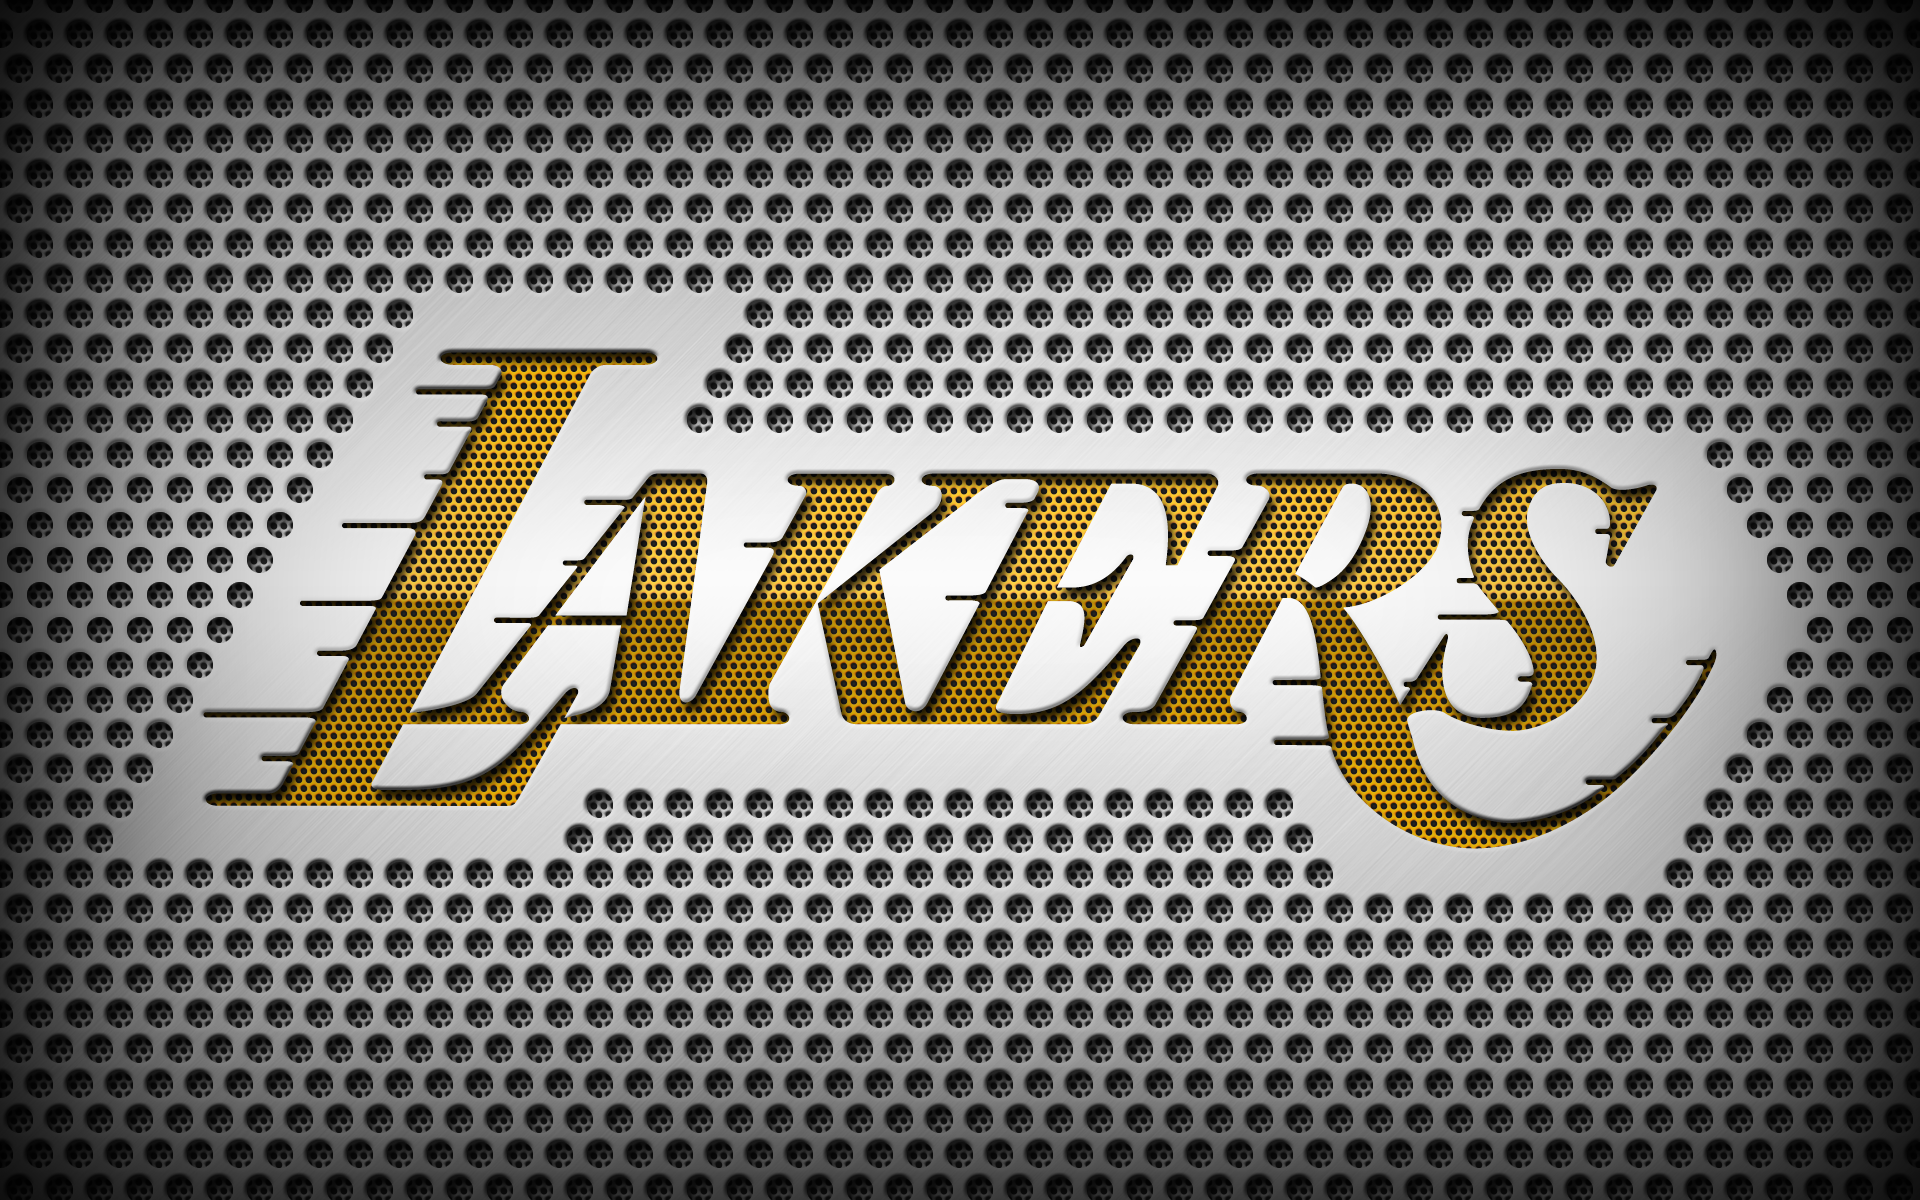 Awesome Lakers Wallpaper Image Jpg